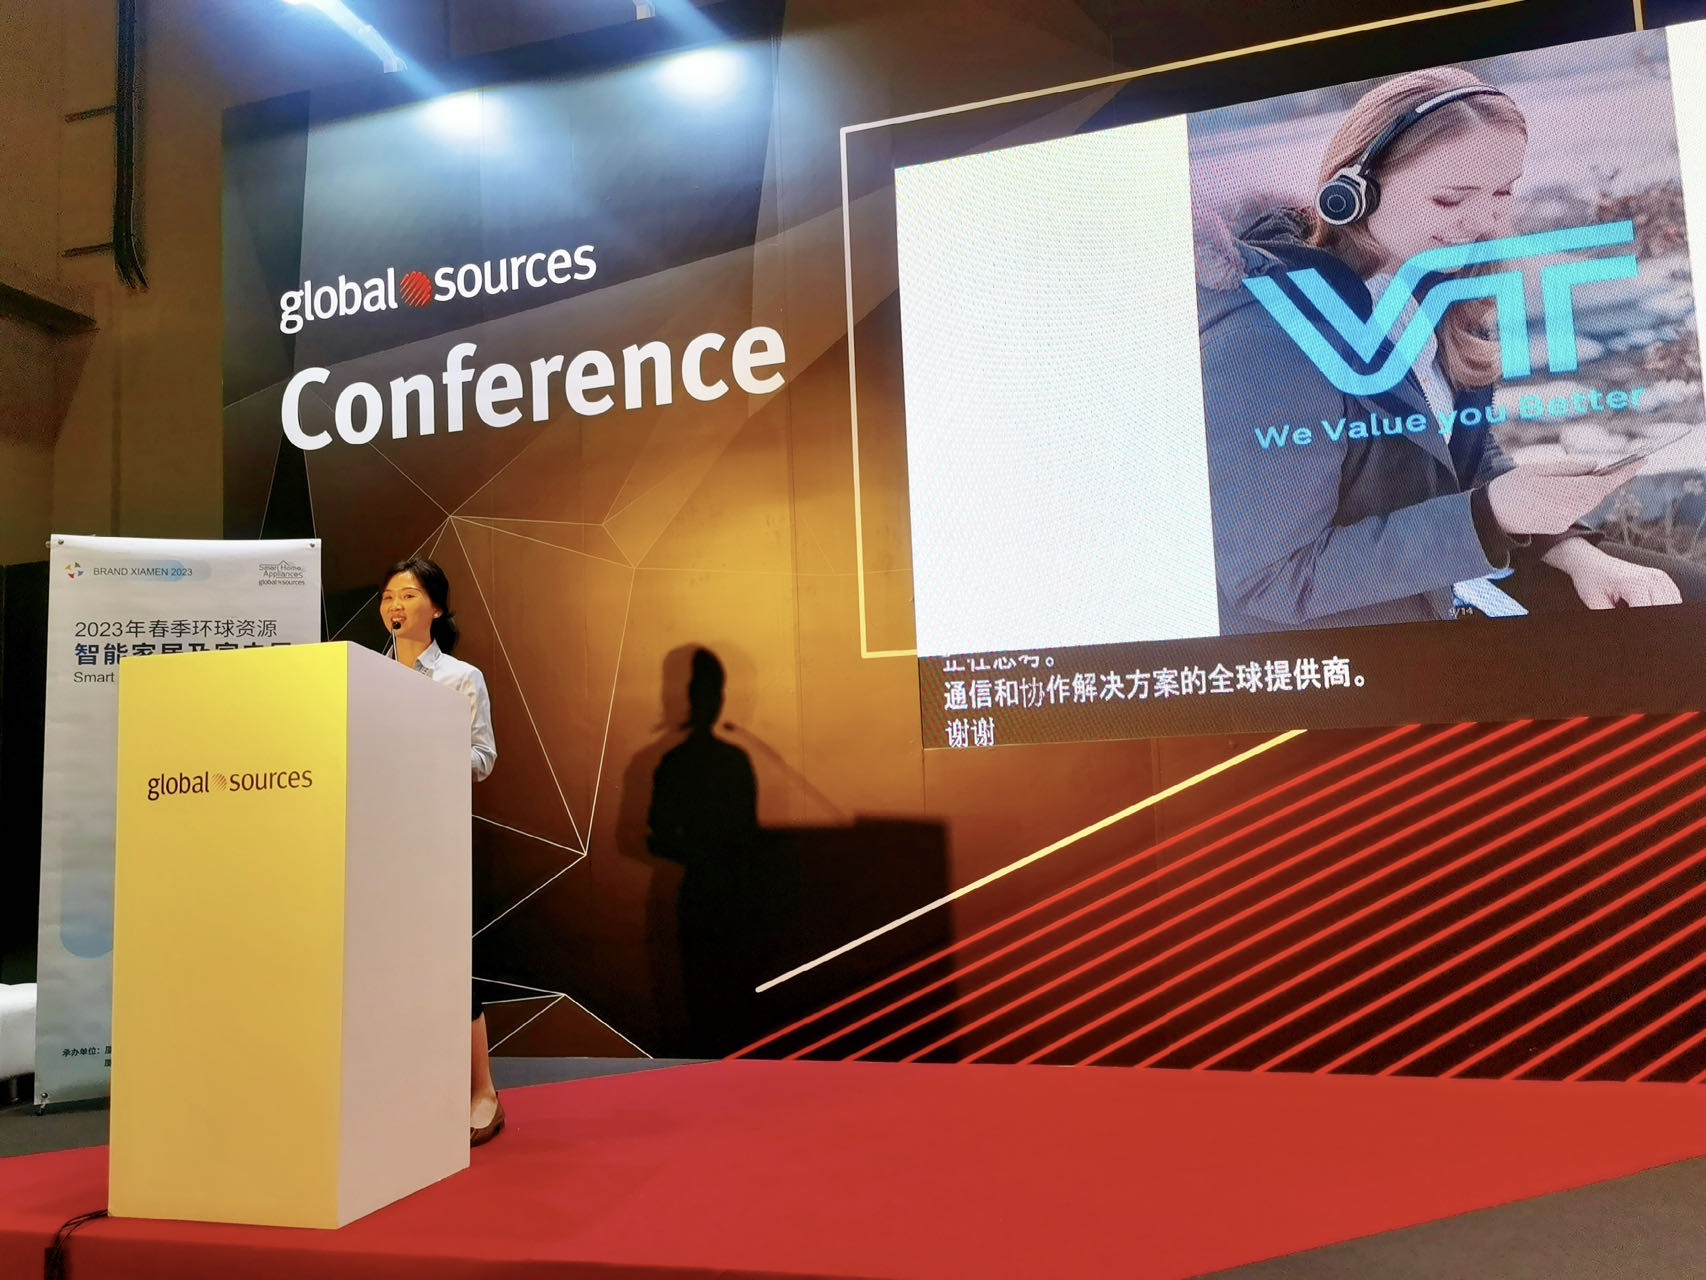 VT brand participated in the Global Sources Hong Kong Show